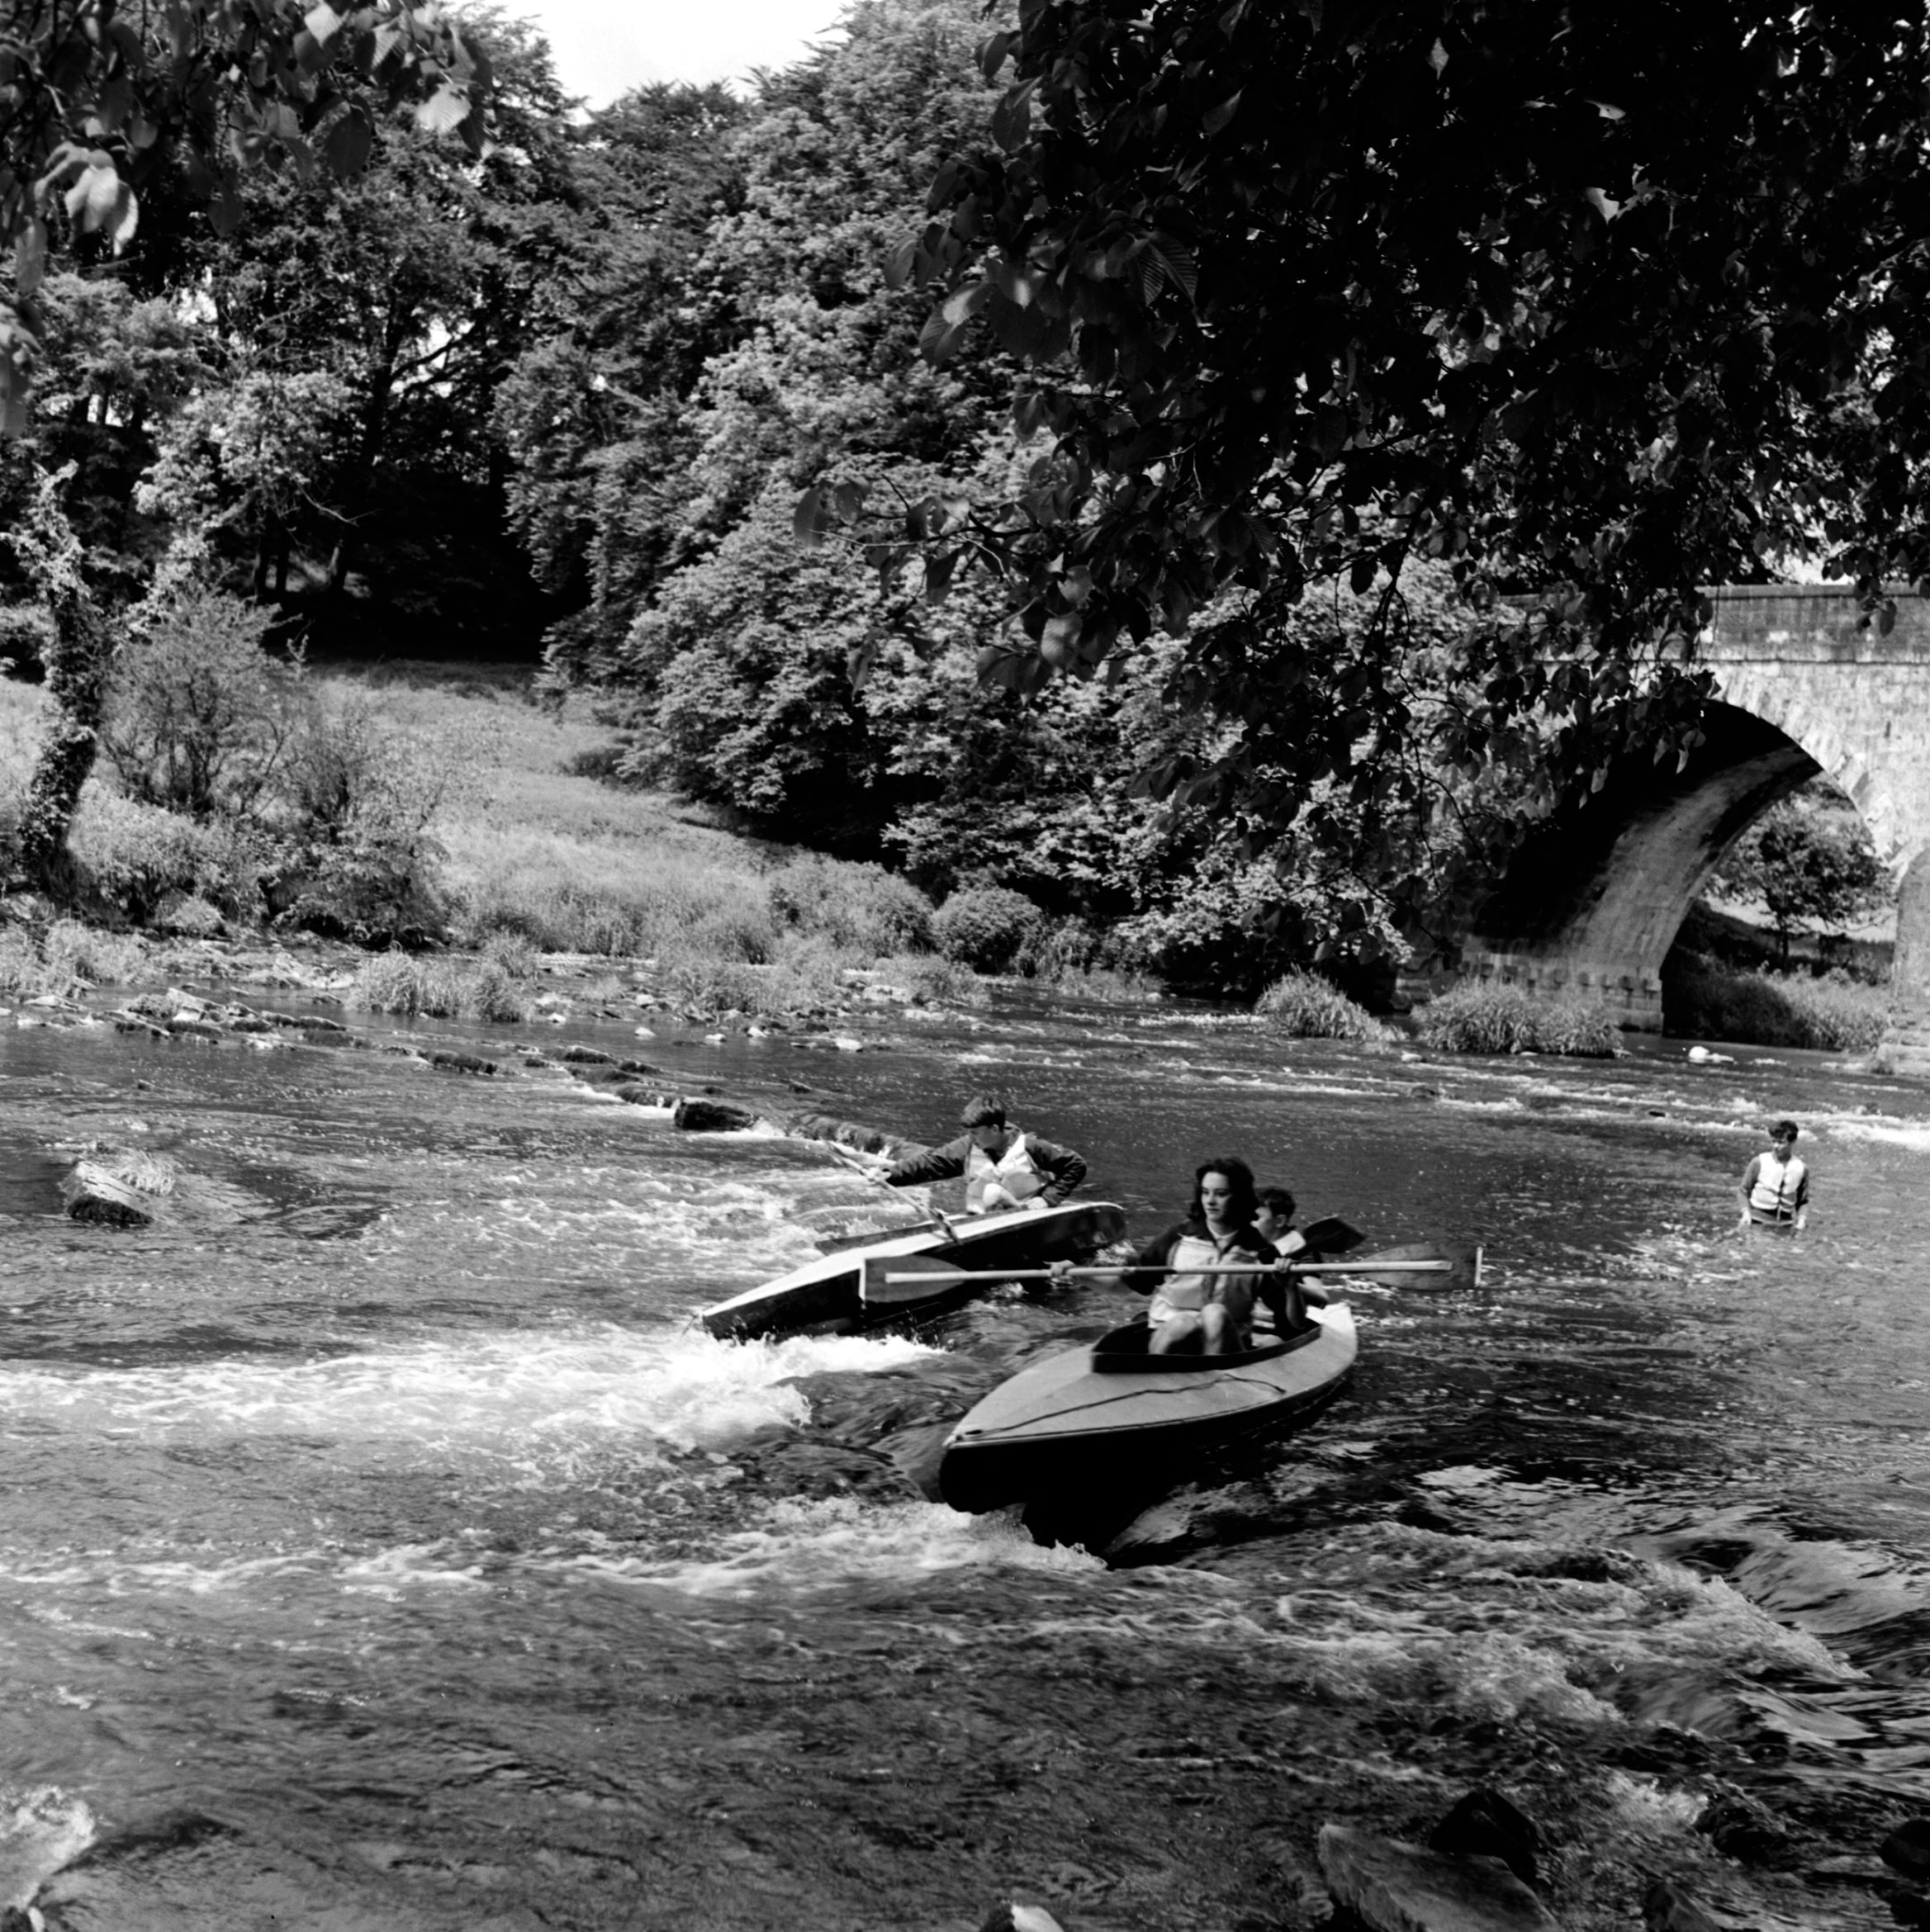 A group of canoeists enjoying the rapids of the River Ribble under Paythorne Bridge (no date). From the Bertram Unné photographic collection.